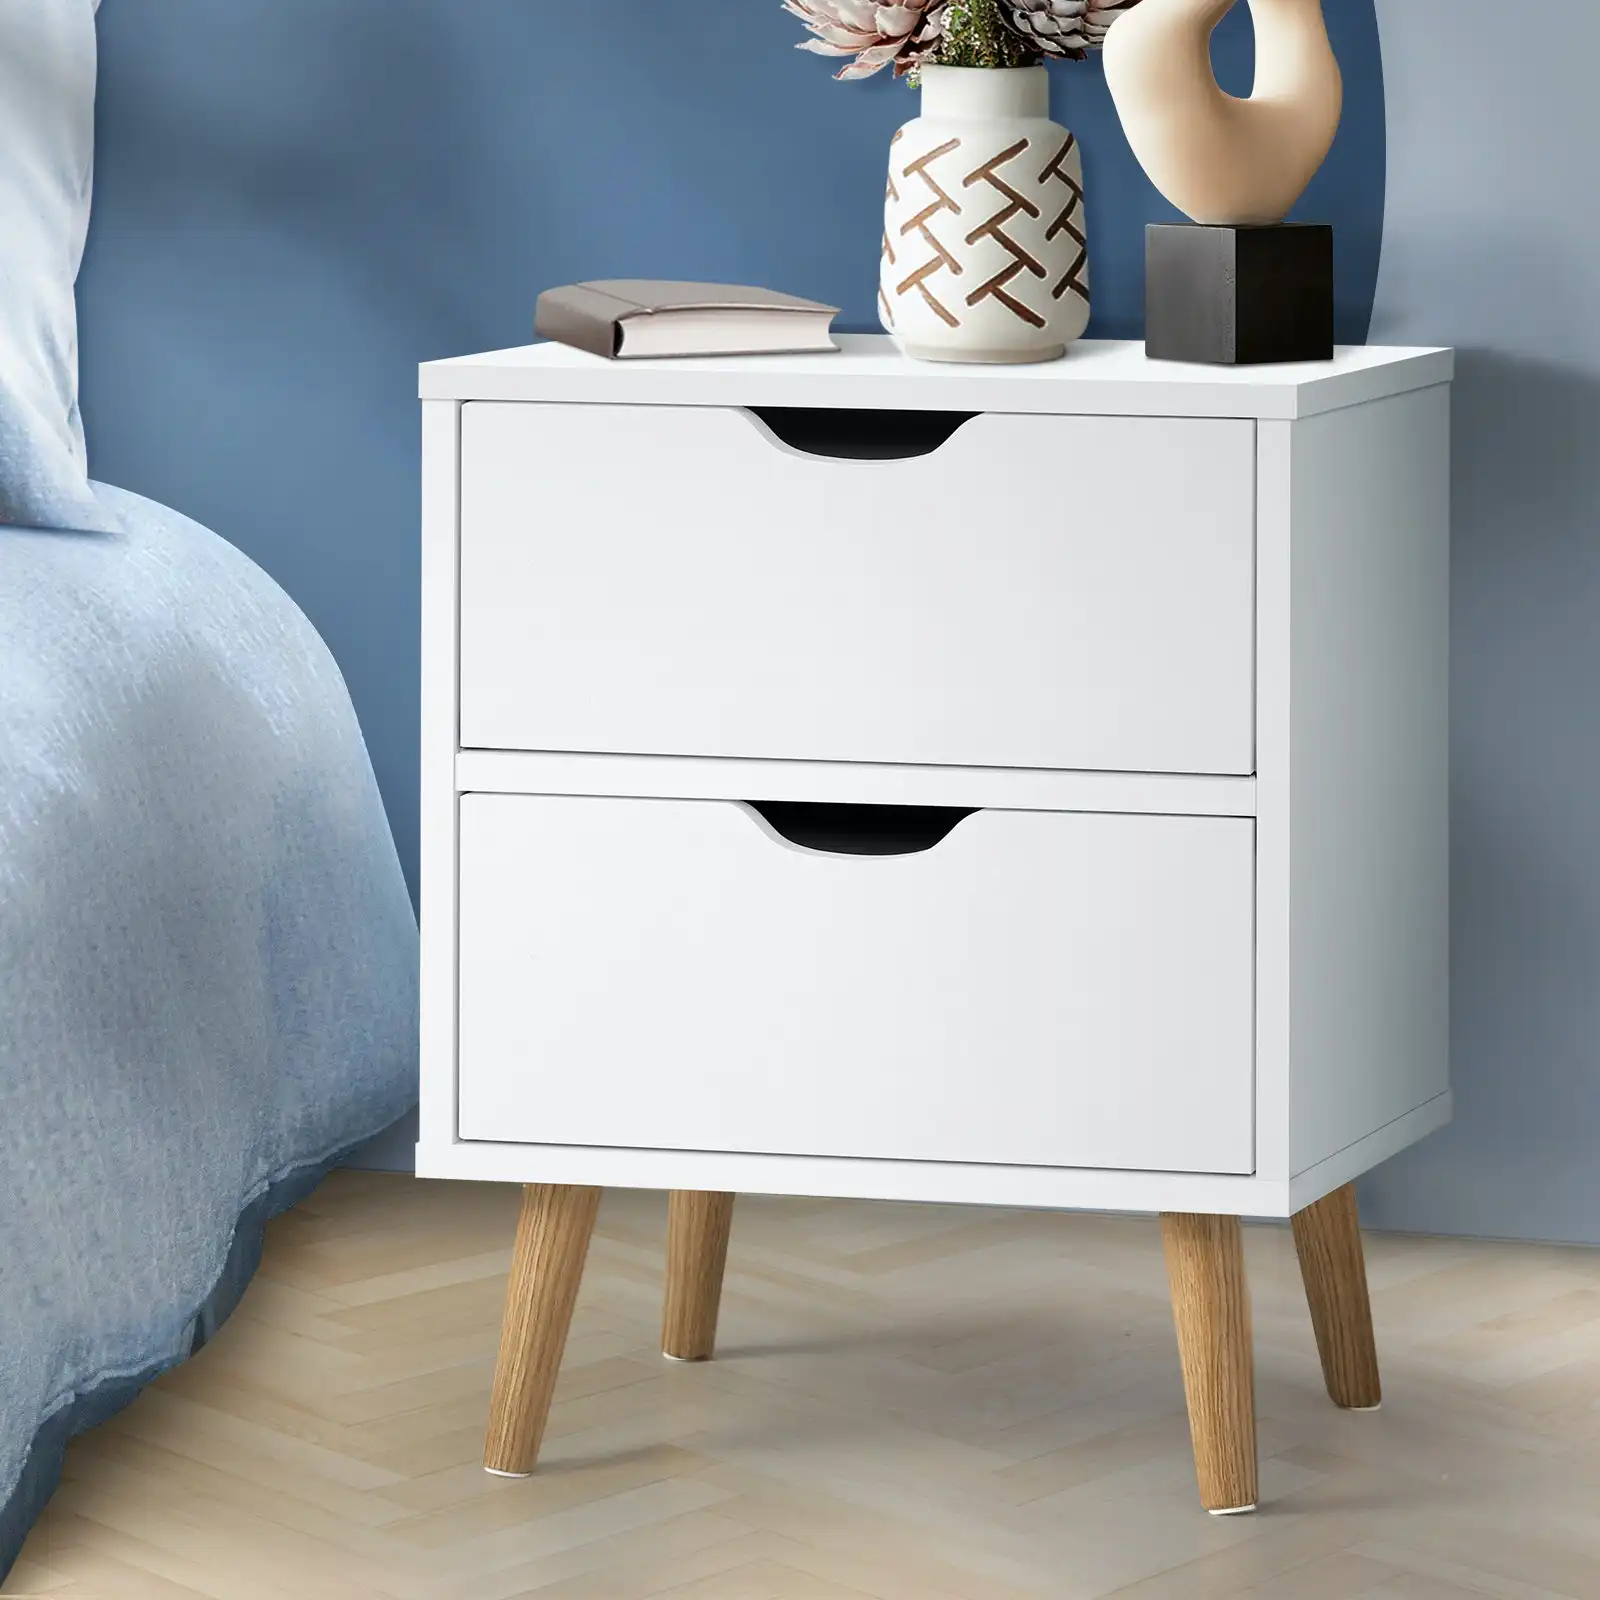 Oikiture Bedside Table White Side Table